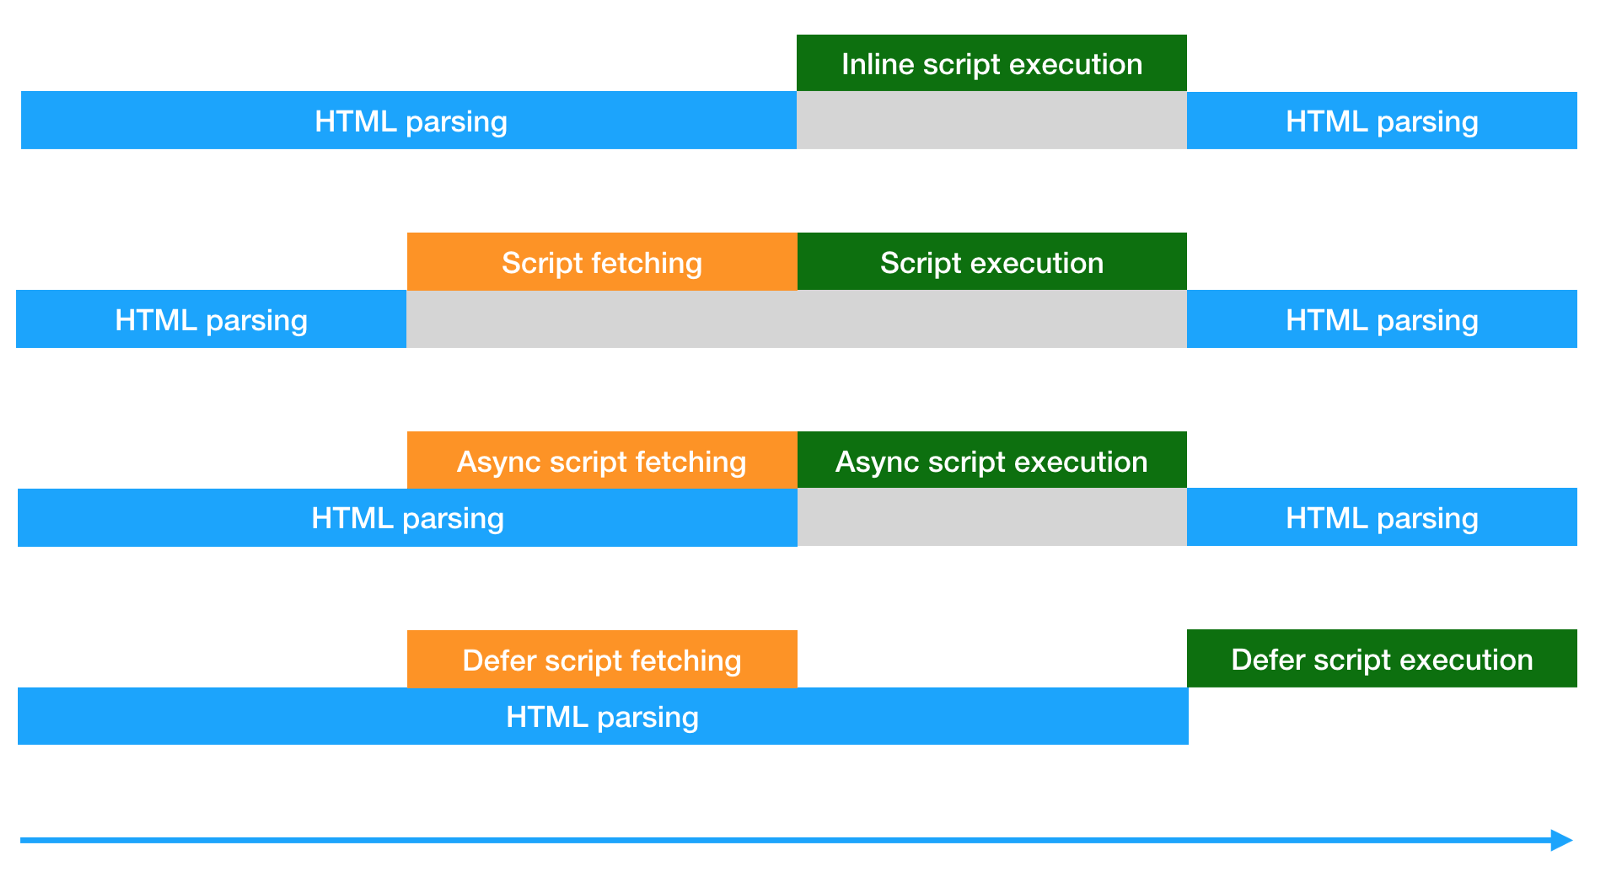 Different ways of script fetching and execution